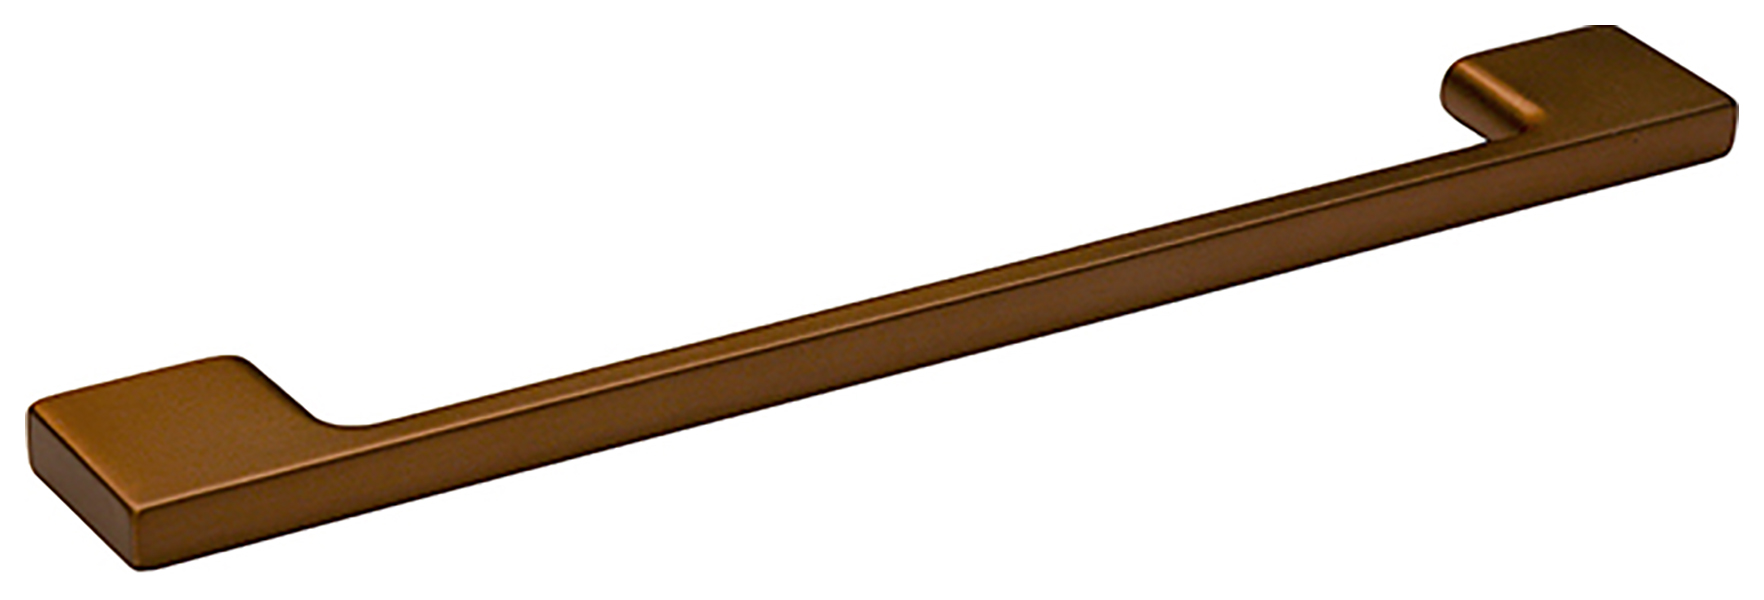 Image of Wickes Dunster Brushed Bronze Bar Handle - 192 x 23mm